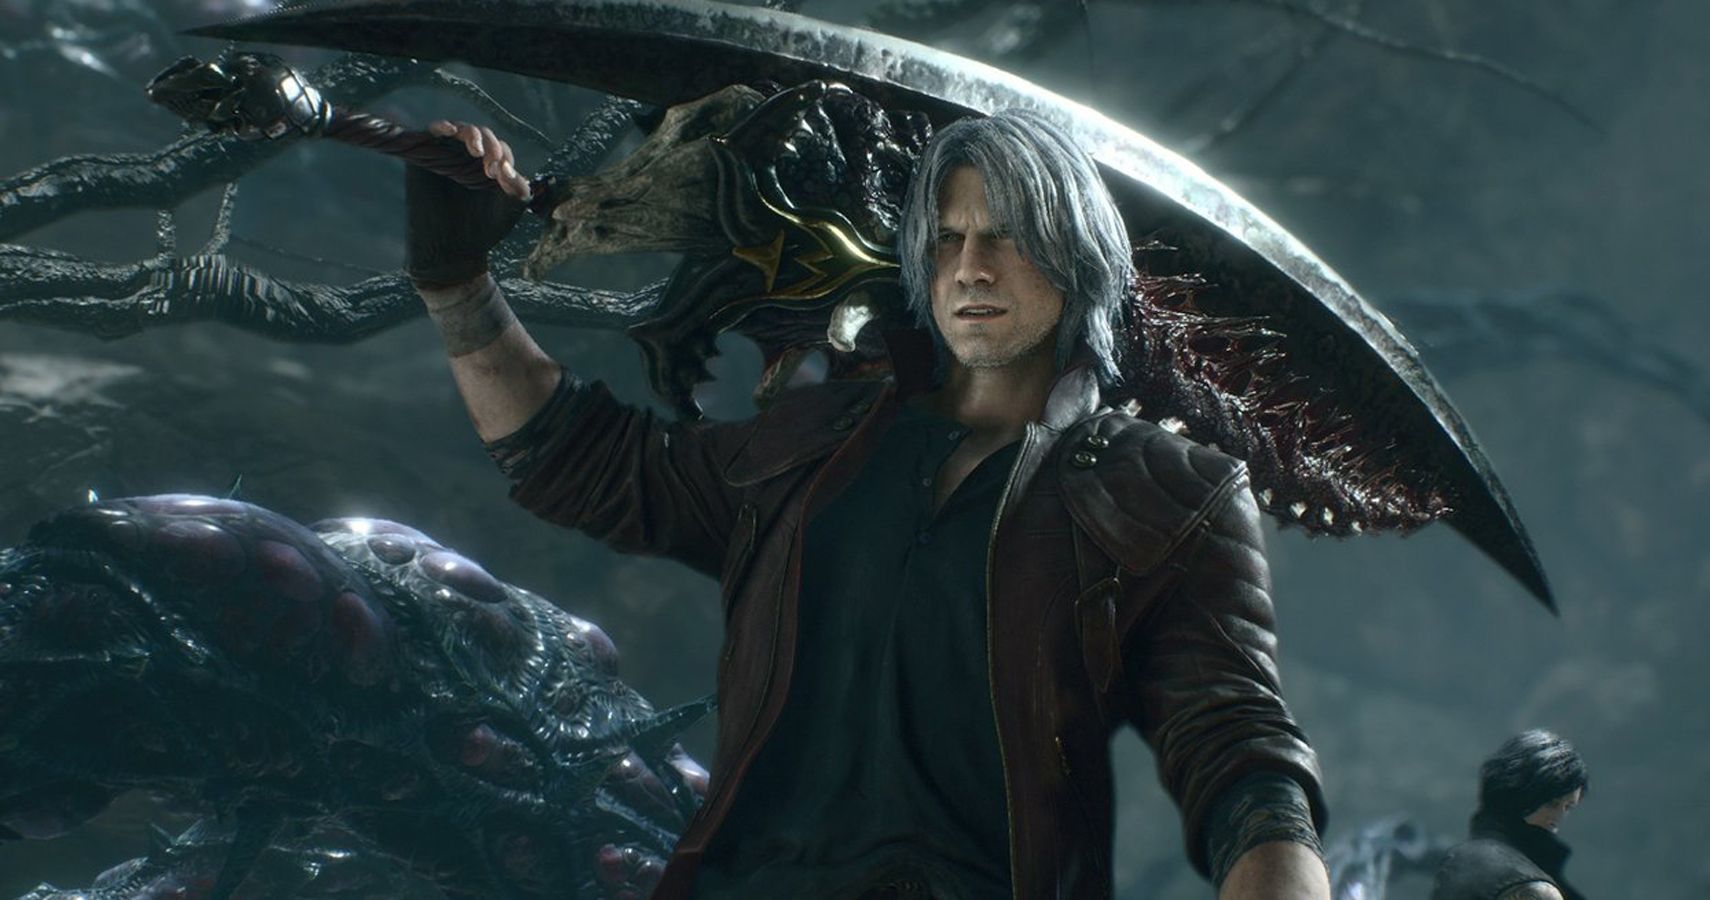 devil may cry 5 bloody palace